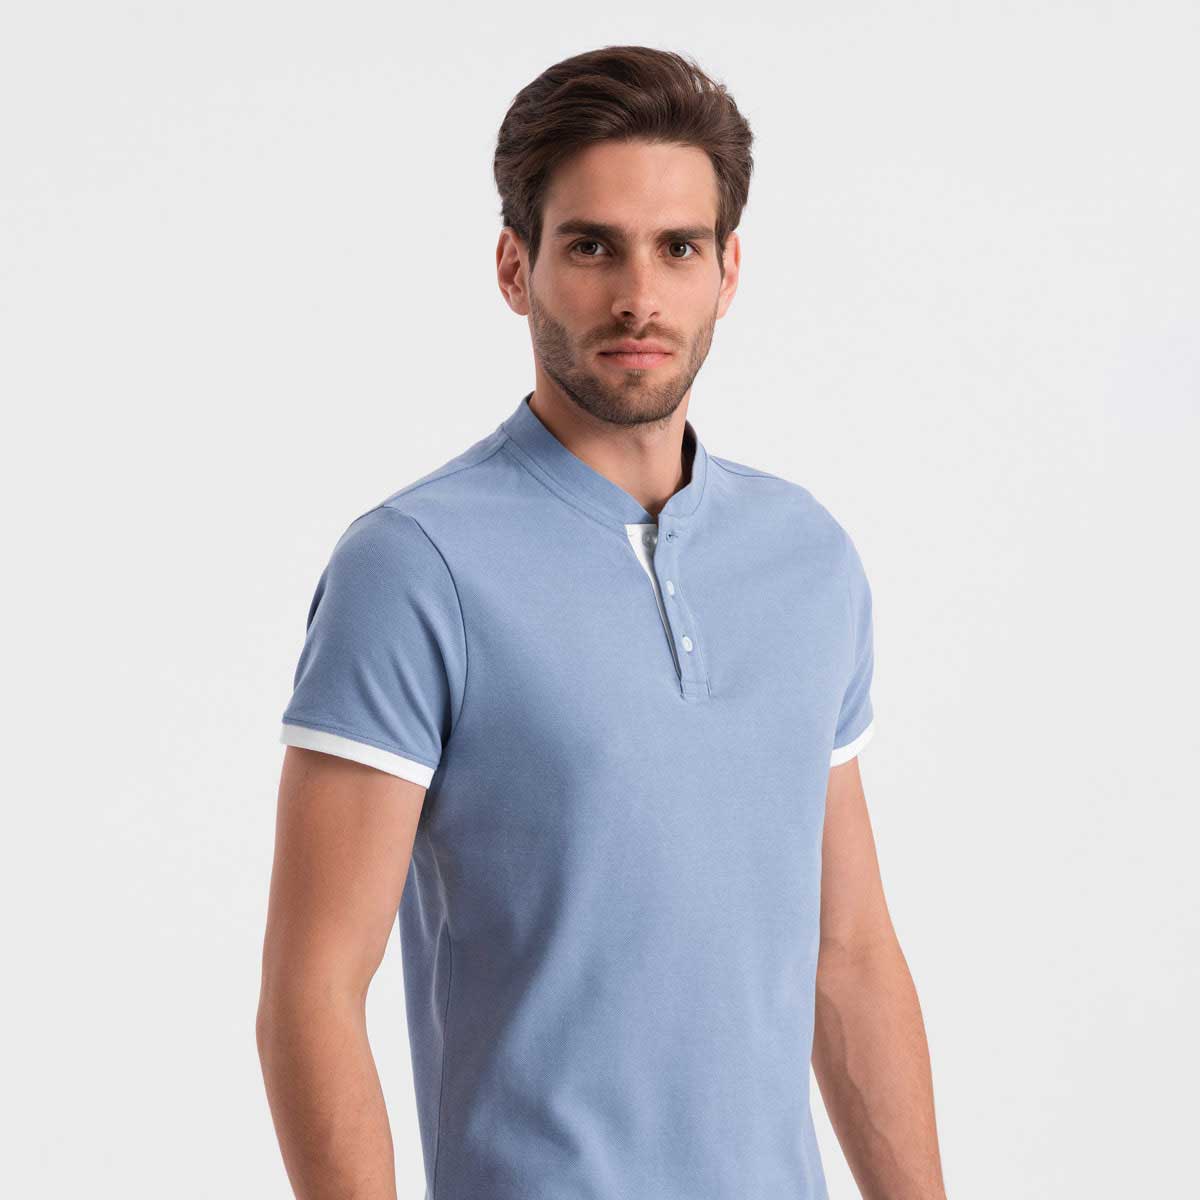 Wholesale Polo Shirts Manufacturers in Nalchik